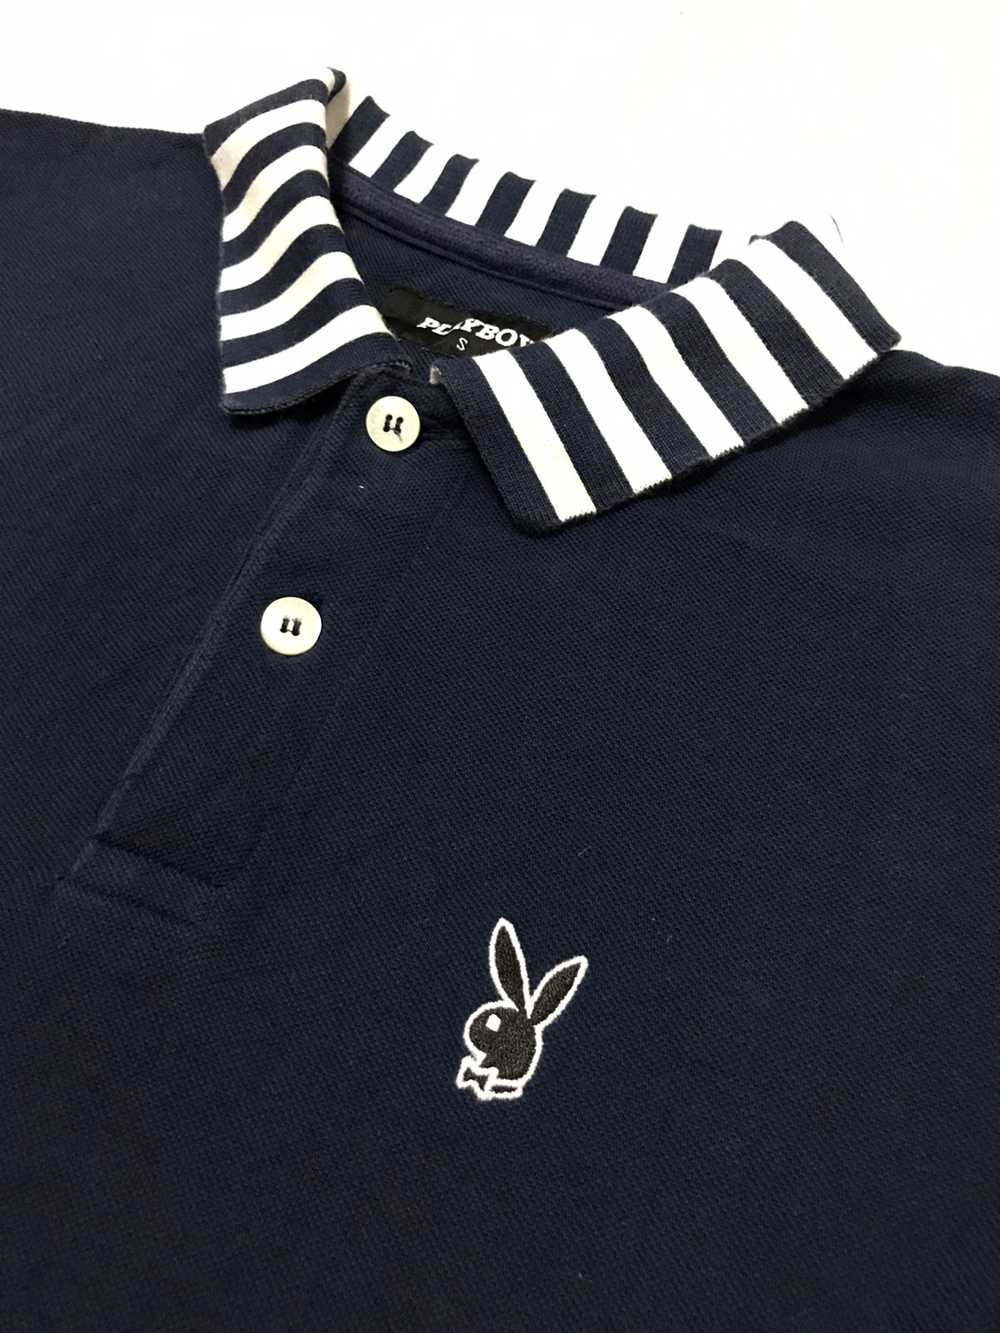 Playboy - Playboy polos for women’s - image 2